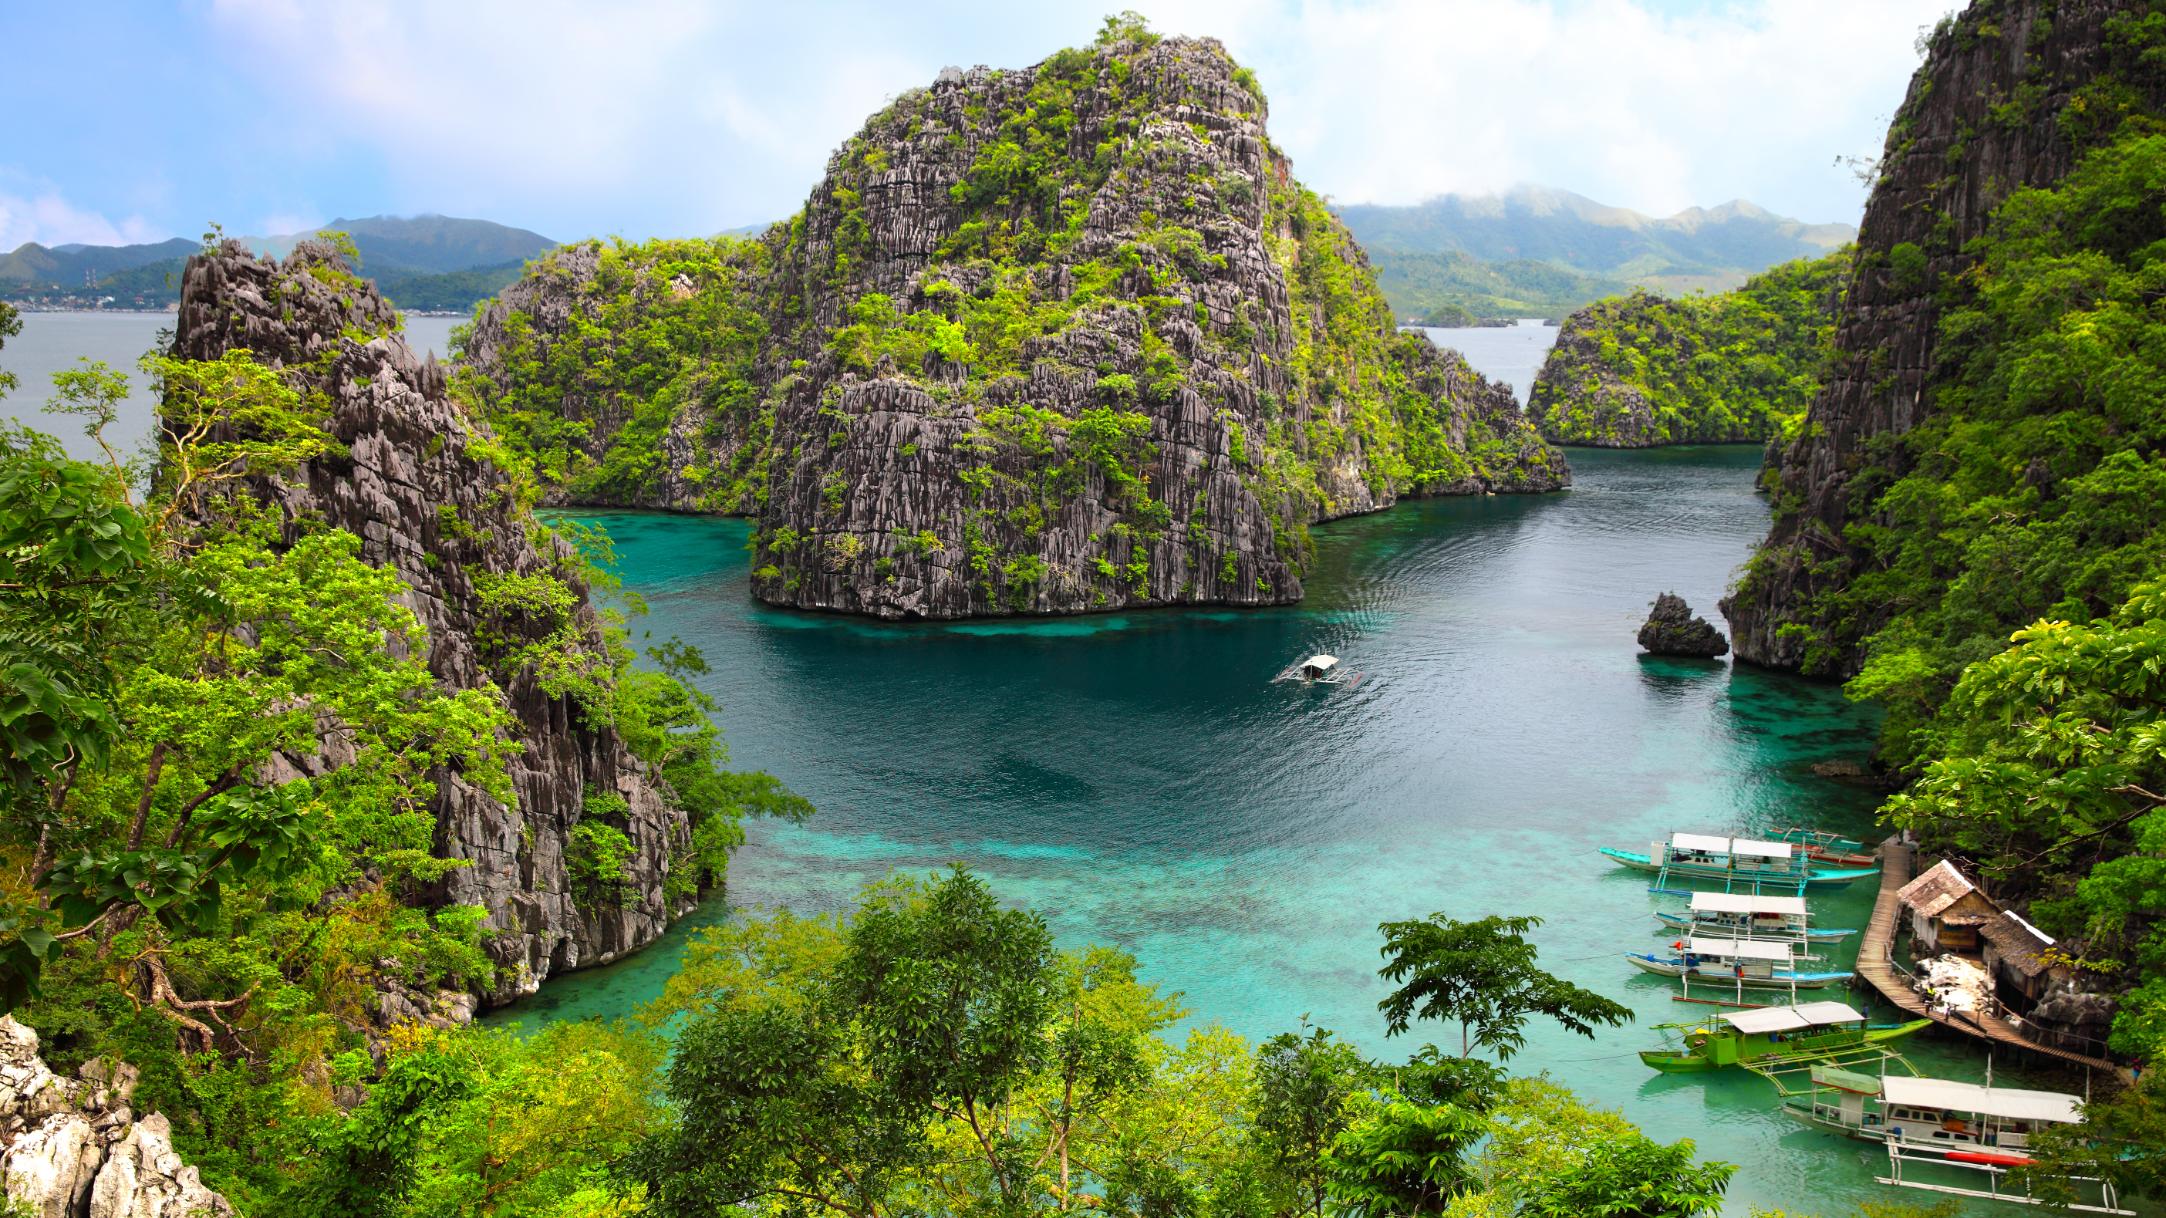 10 most beautiful islands of the world